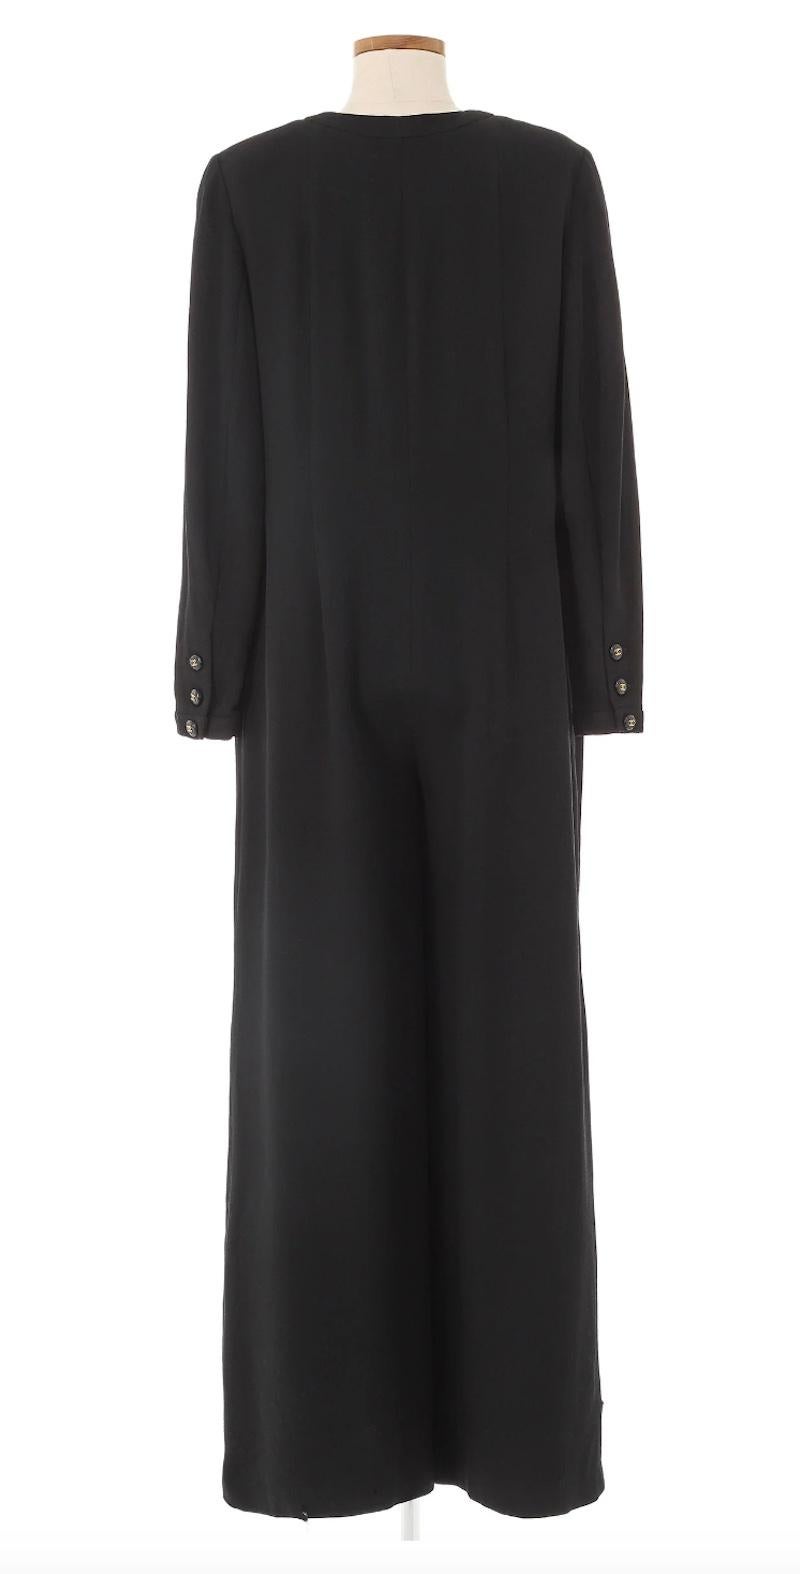 Chanel Black Jumpsuit likely from the Spring 1995 collection by Karl Lagerfeld. Sophisticated and tailored silhouette in a black wool material, with Chanel buttons along the front & pockets. Perfect piece for the fall/winter. Excellent Vintage